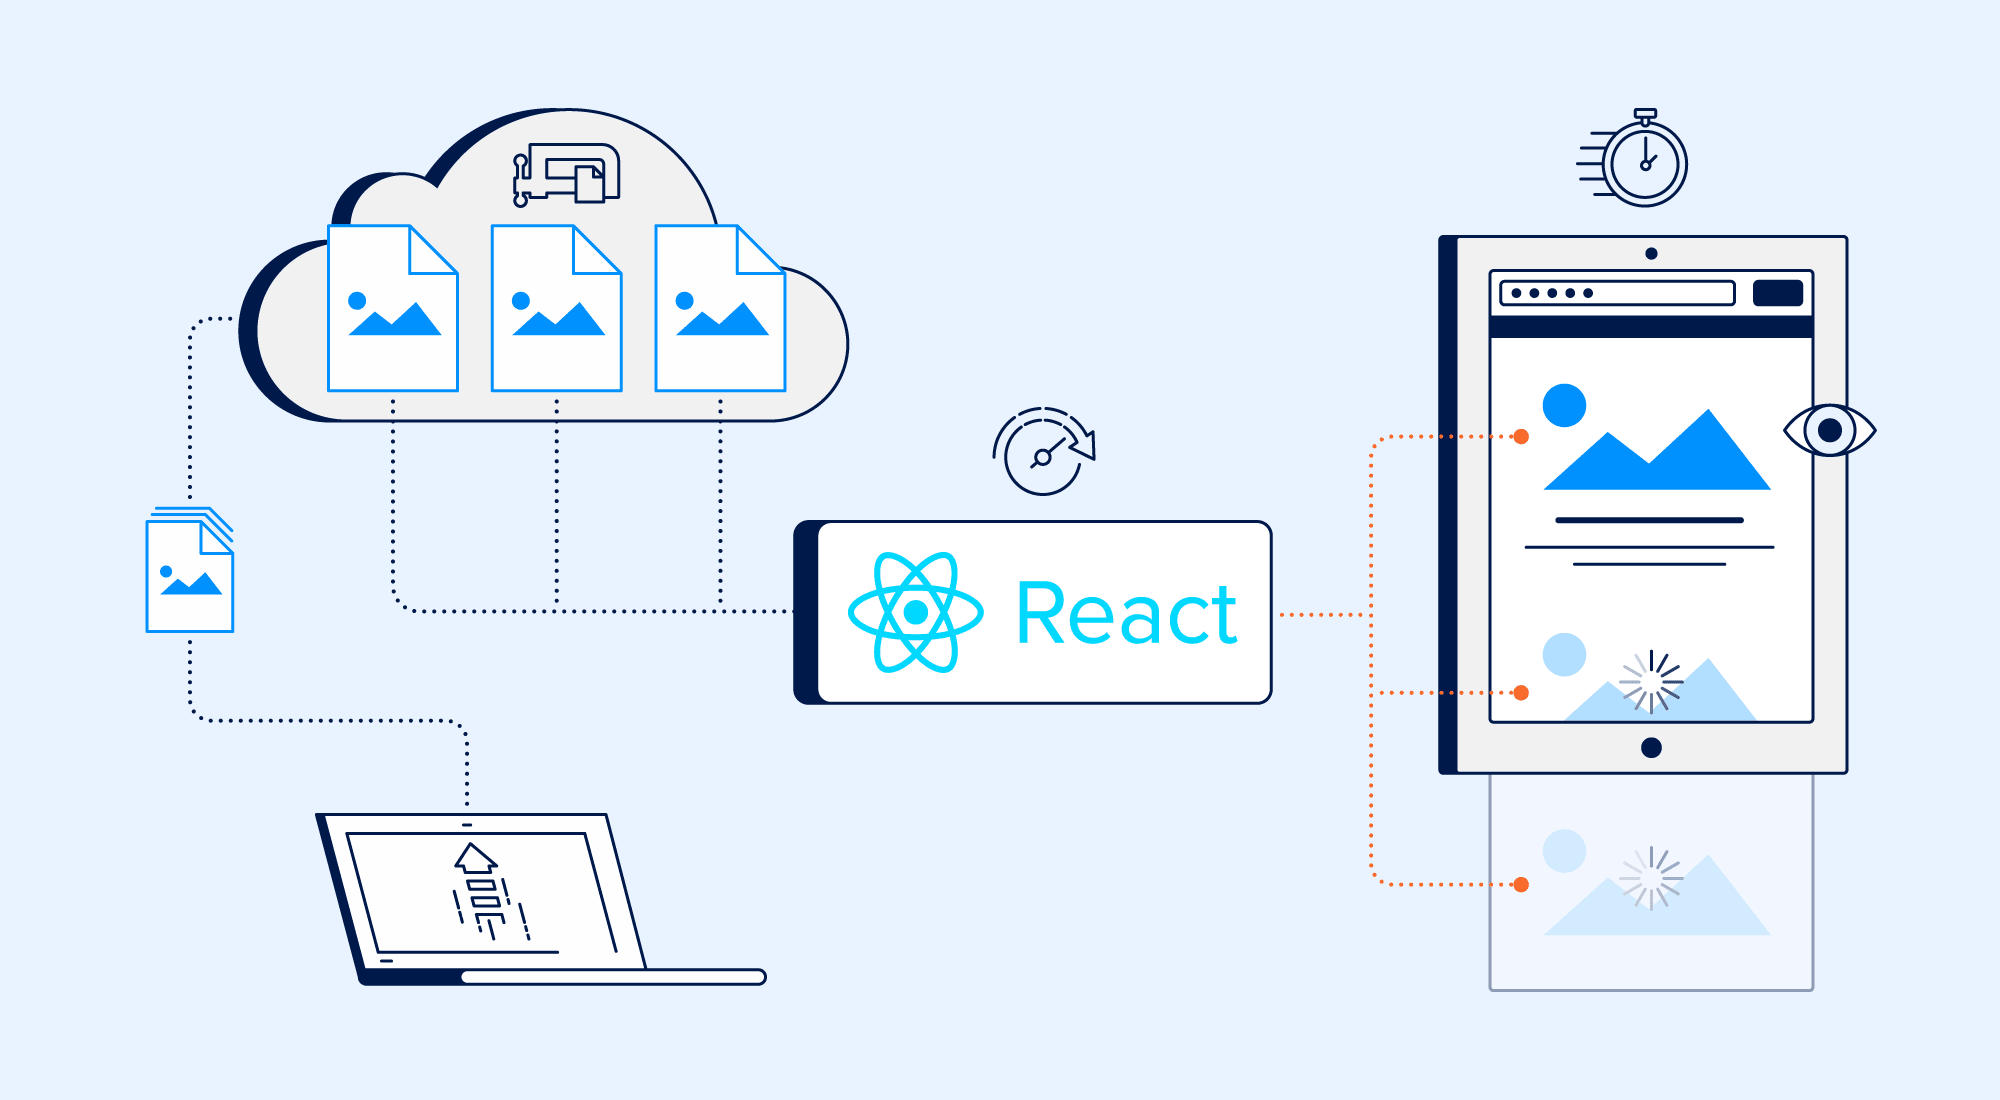 How to use React Suspense or lazy loading